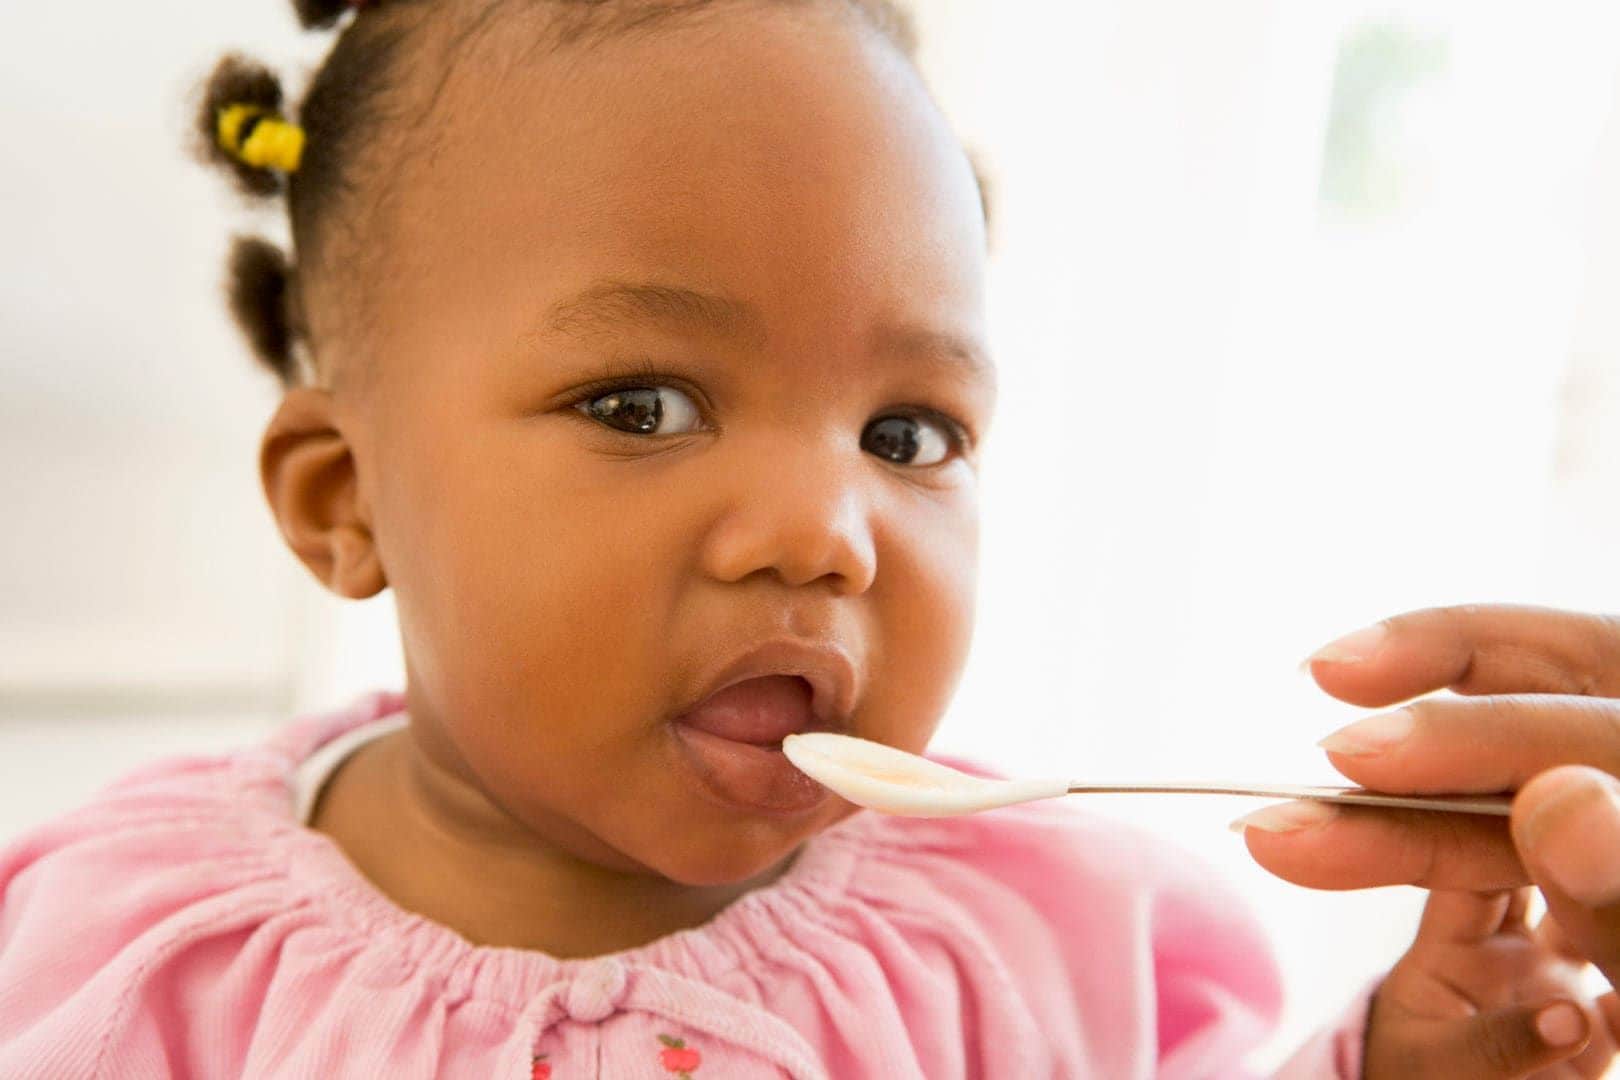 Baby Self-Feeding: Tips, Tricks and Finger Foods to Try